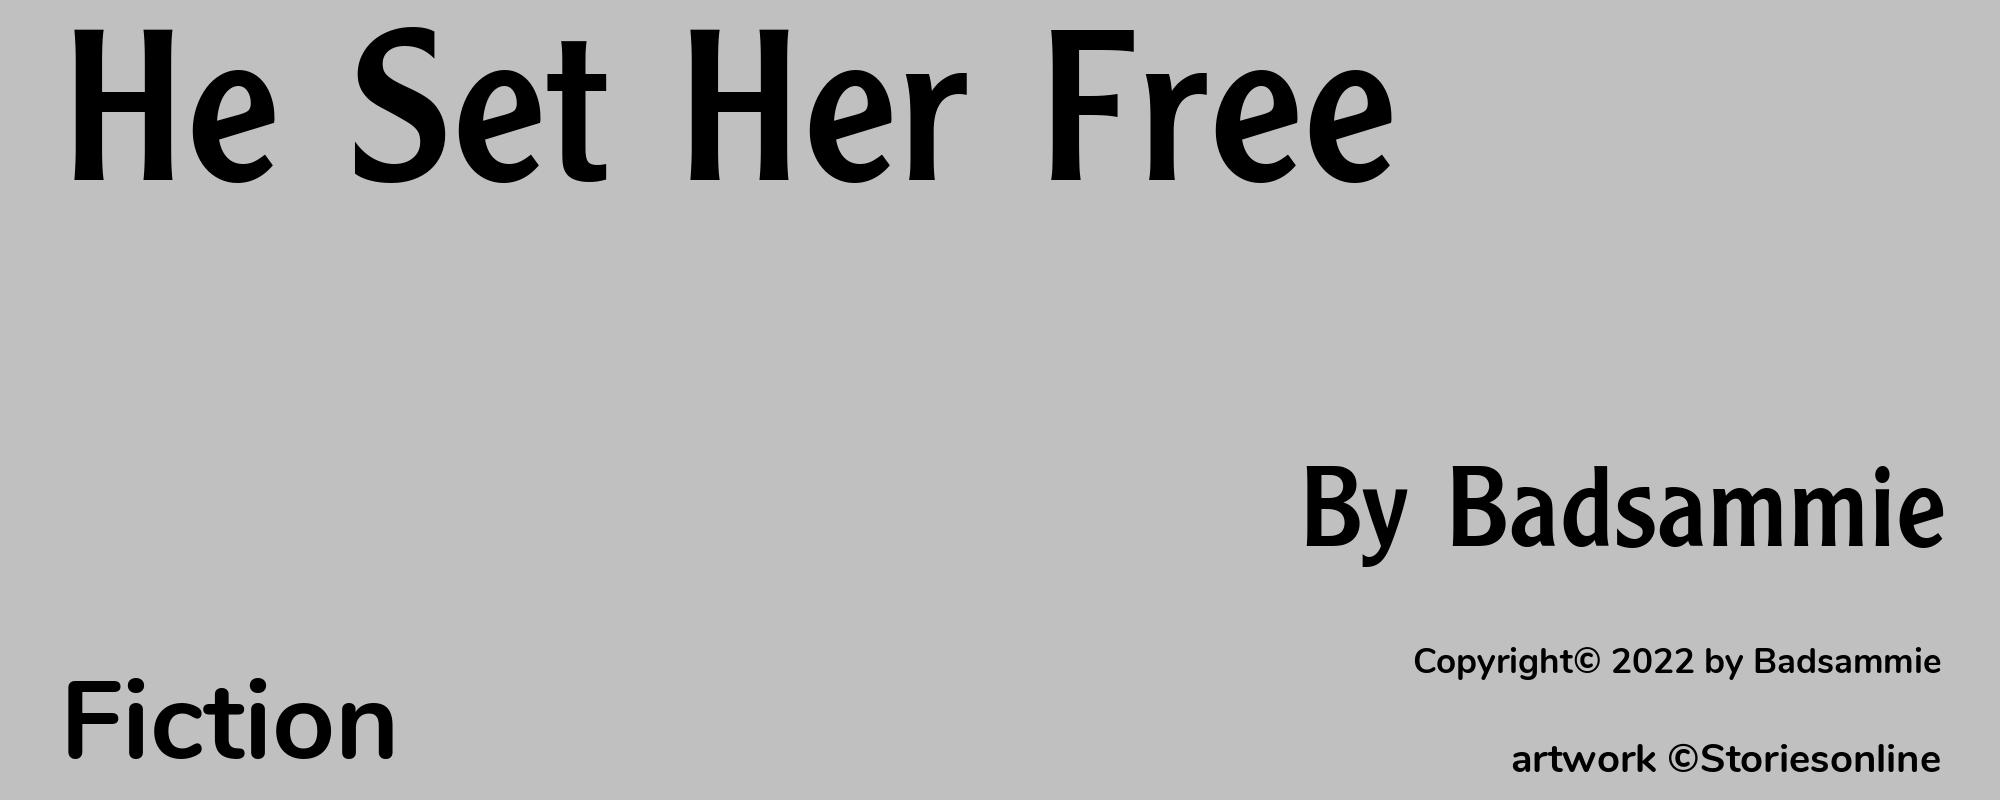 He Set Her Free - Cover